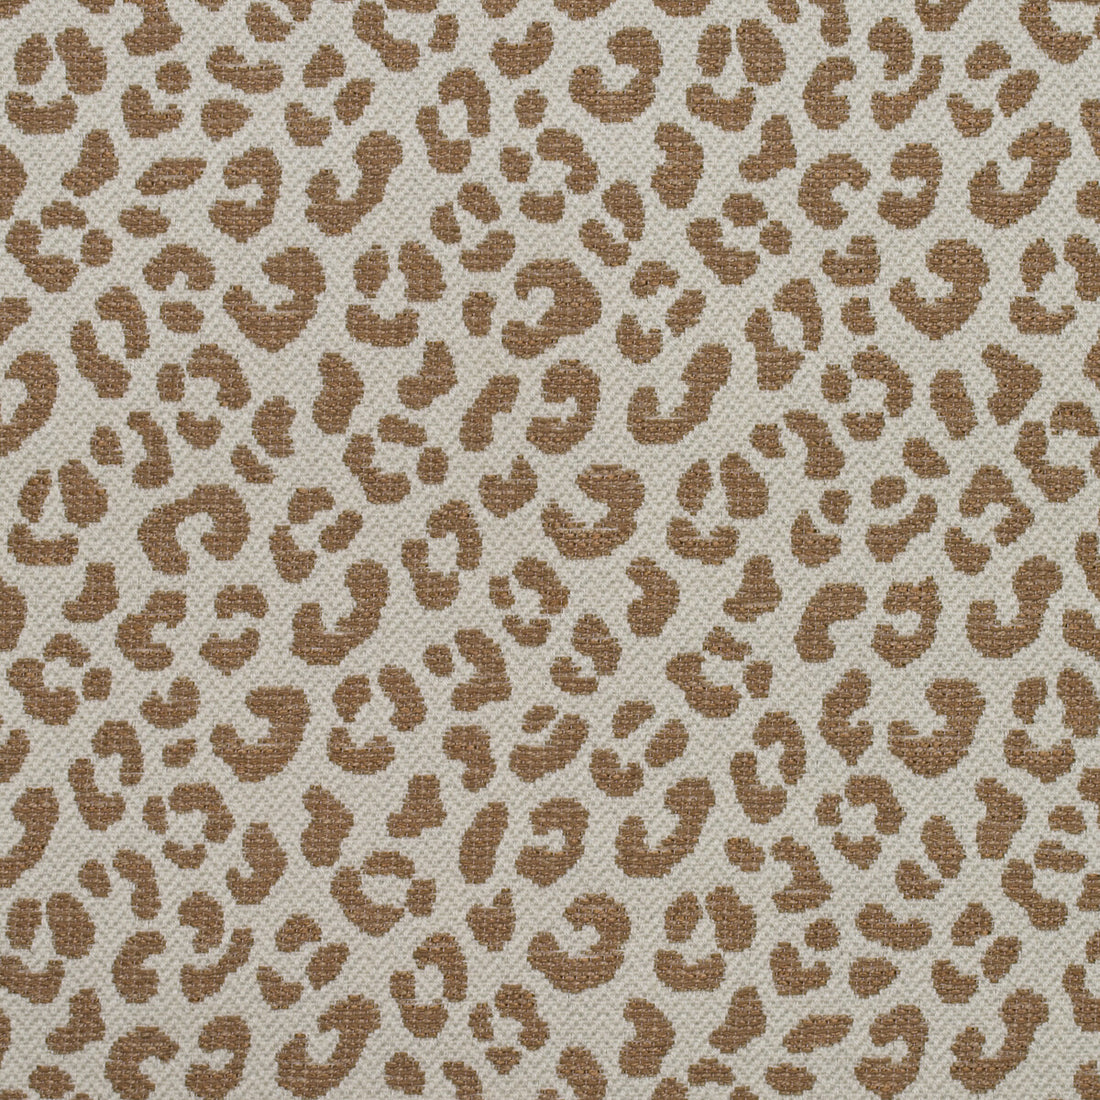 Wildcat fabric in autumn color - pattern AM100400.624.0 - by Kravet Couture in the Andrew Martin Woodland By Sophie Paterson collection